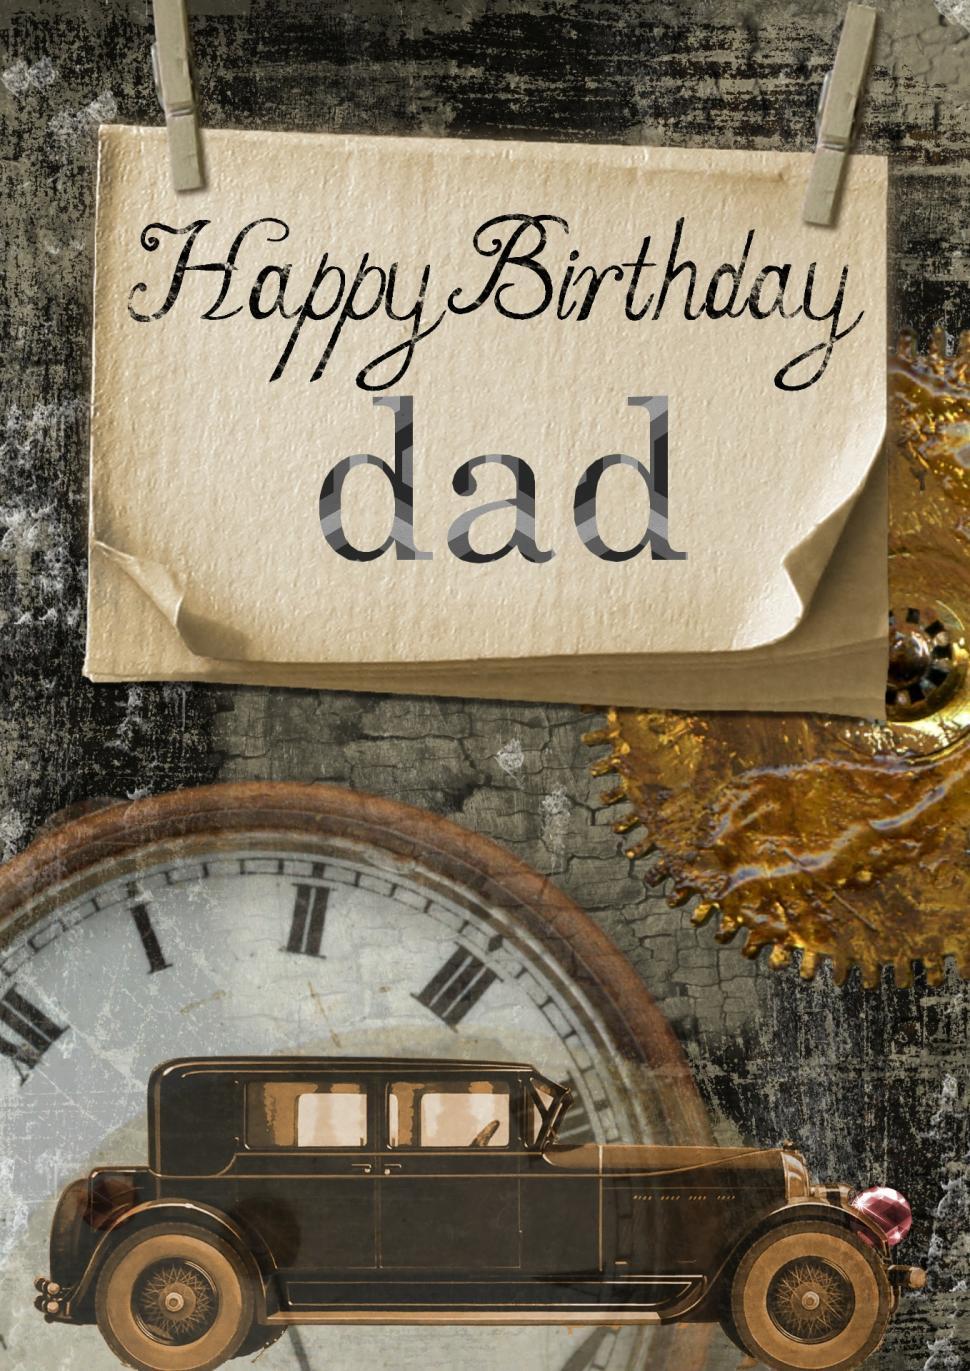 Free Image of Happy Birthday Card With Car and Clock 